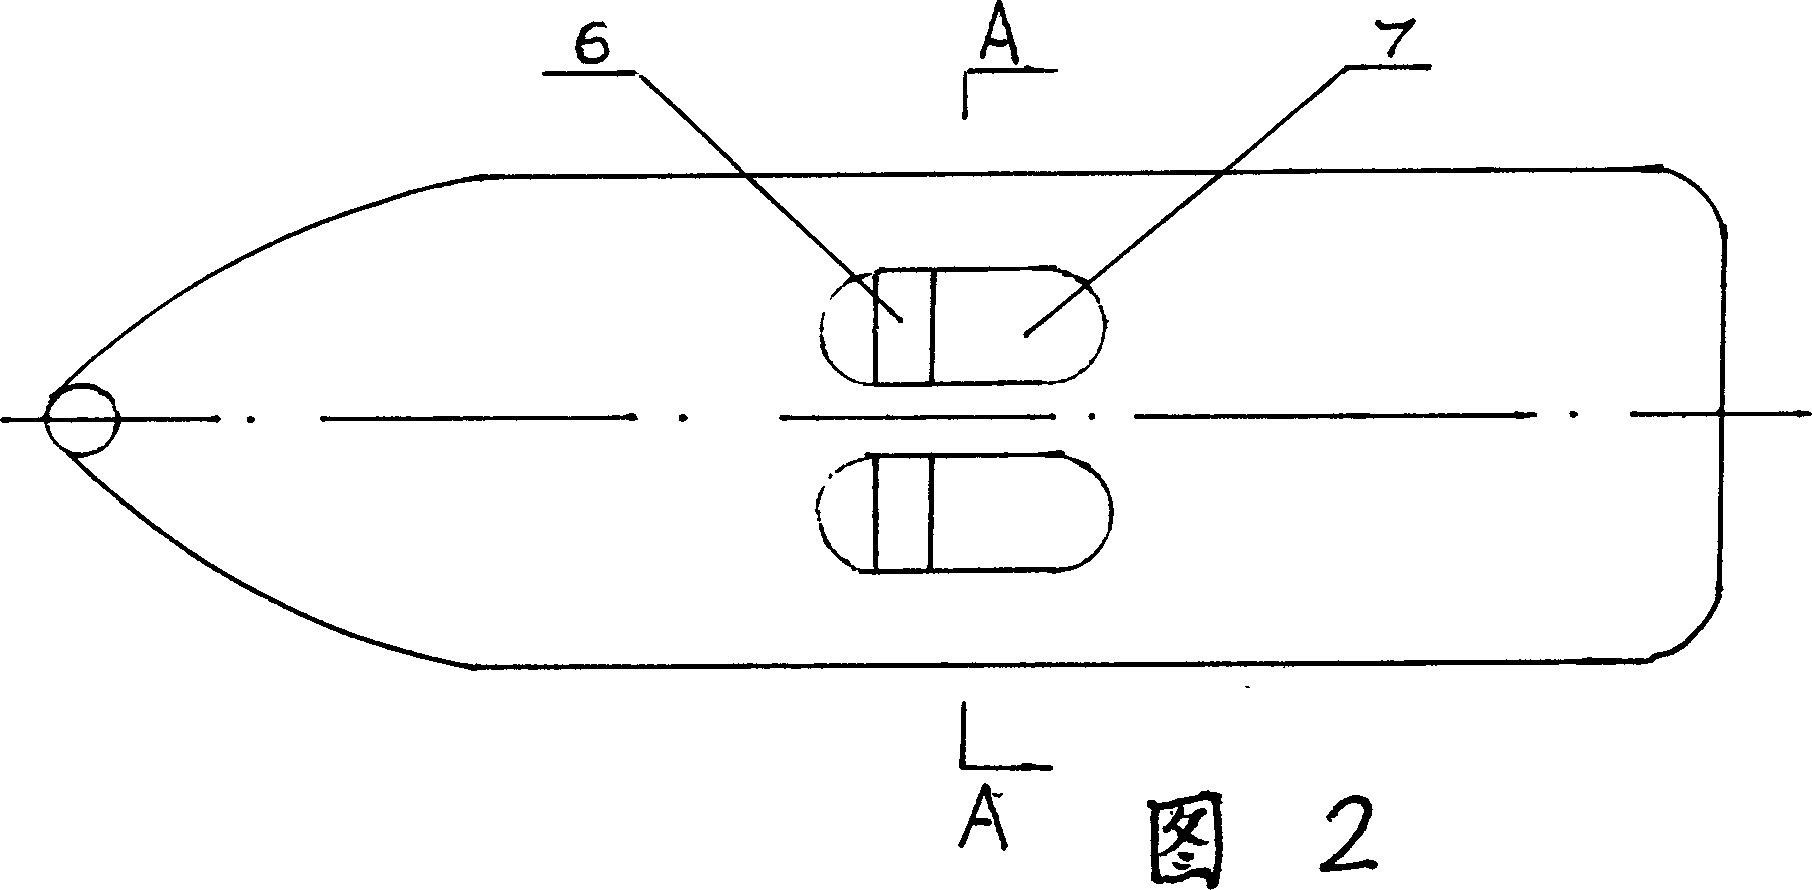 Stick type oar and its matched apparatus